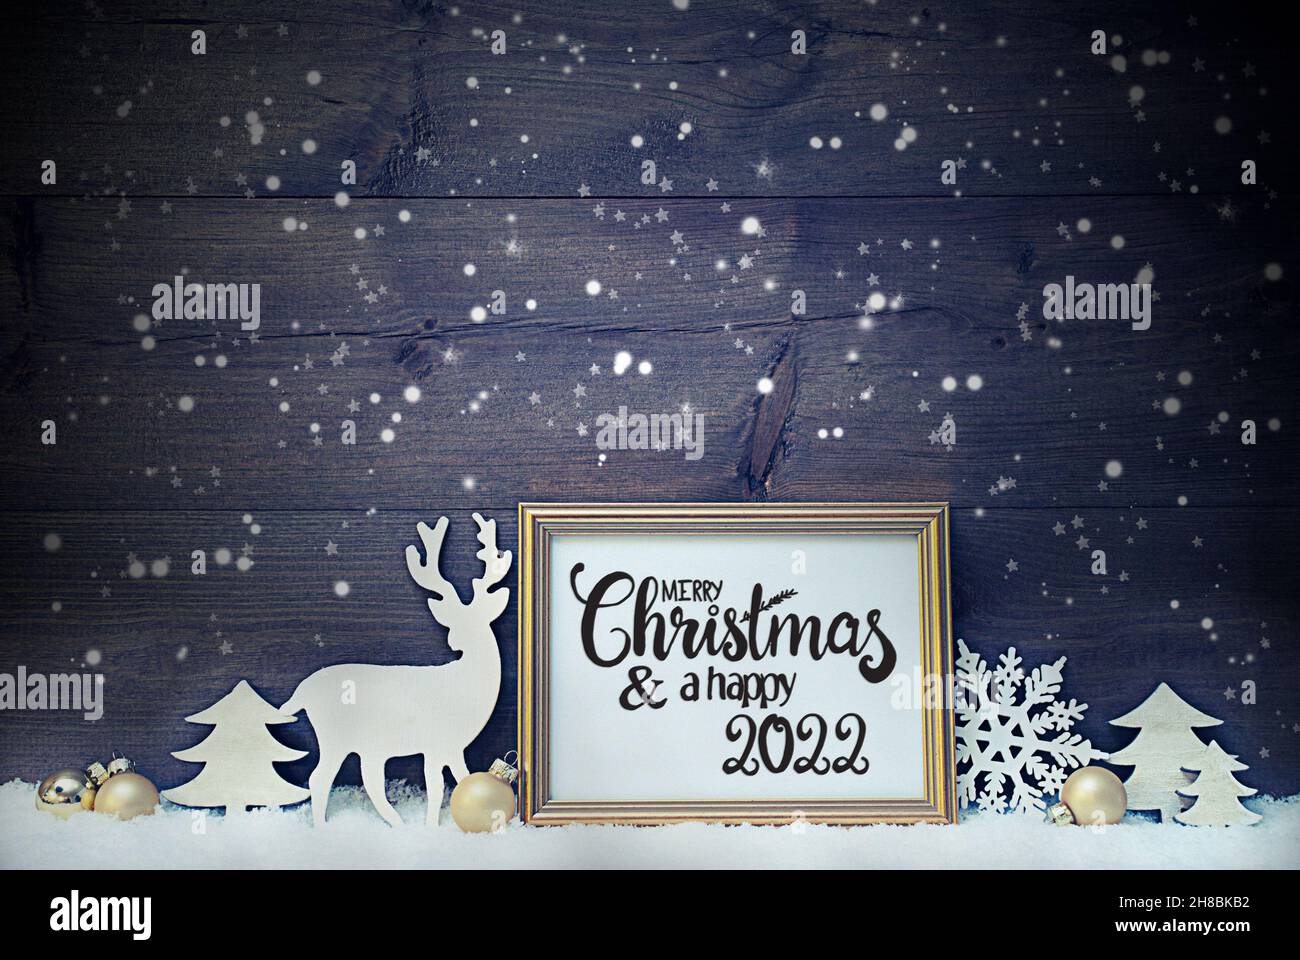 Vintage Frame, Golden Ball, Tree, Snow, Deer, Merry Christmas And A Happy 2022 Stock Photo